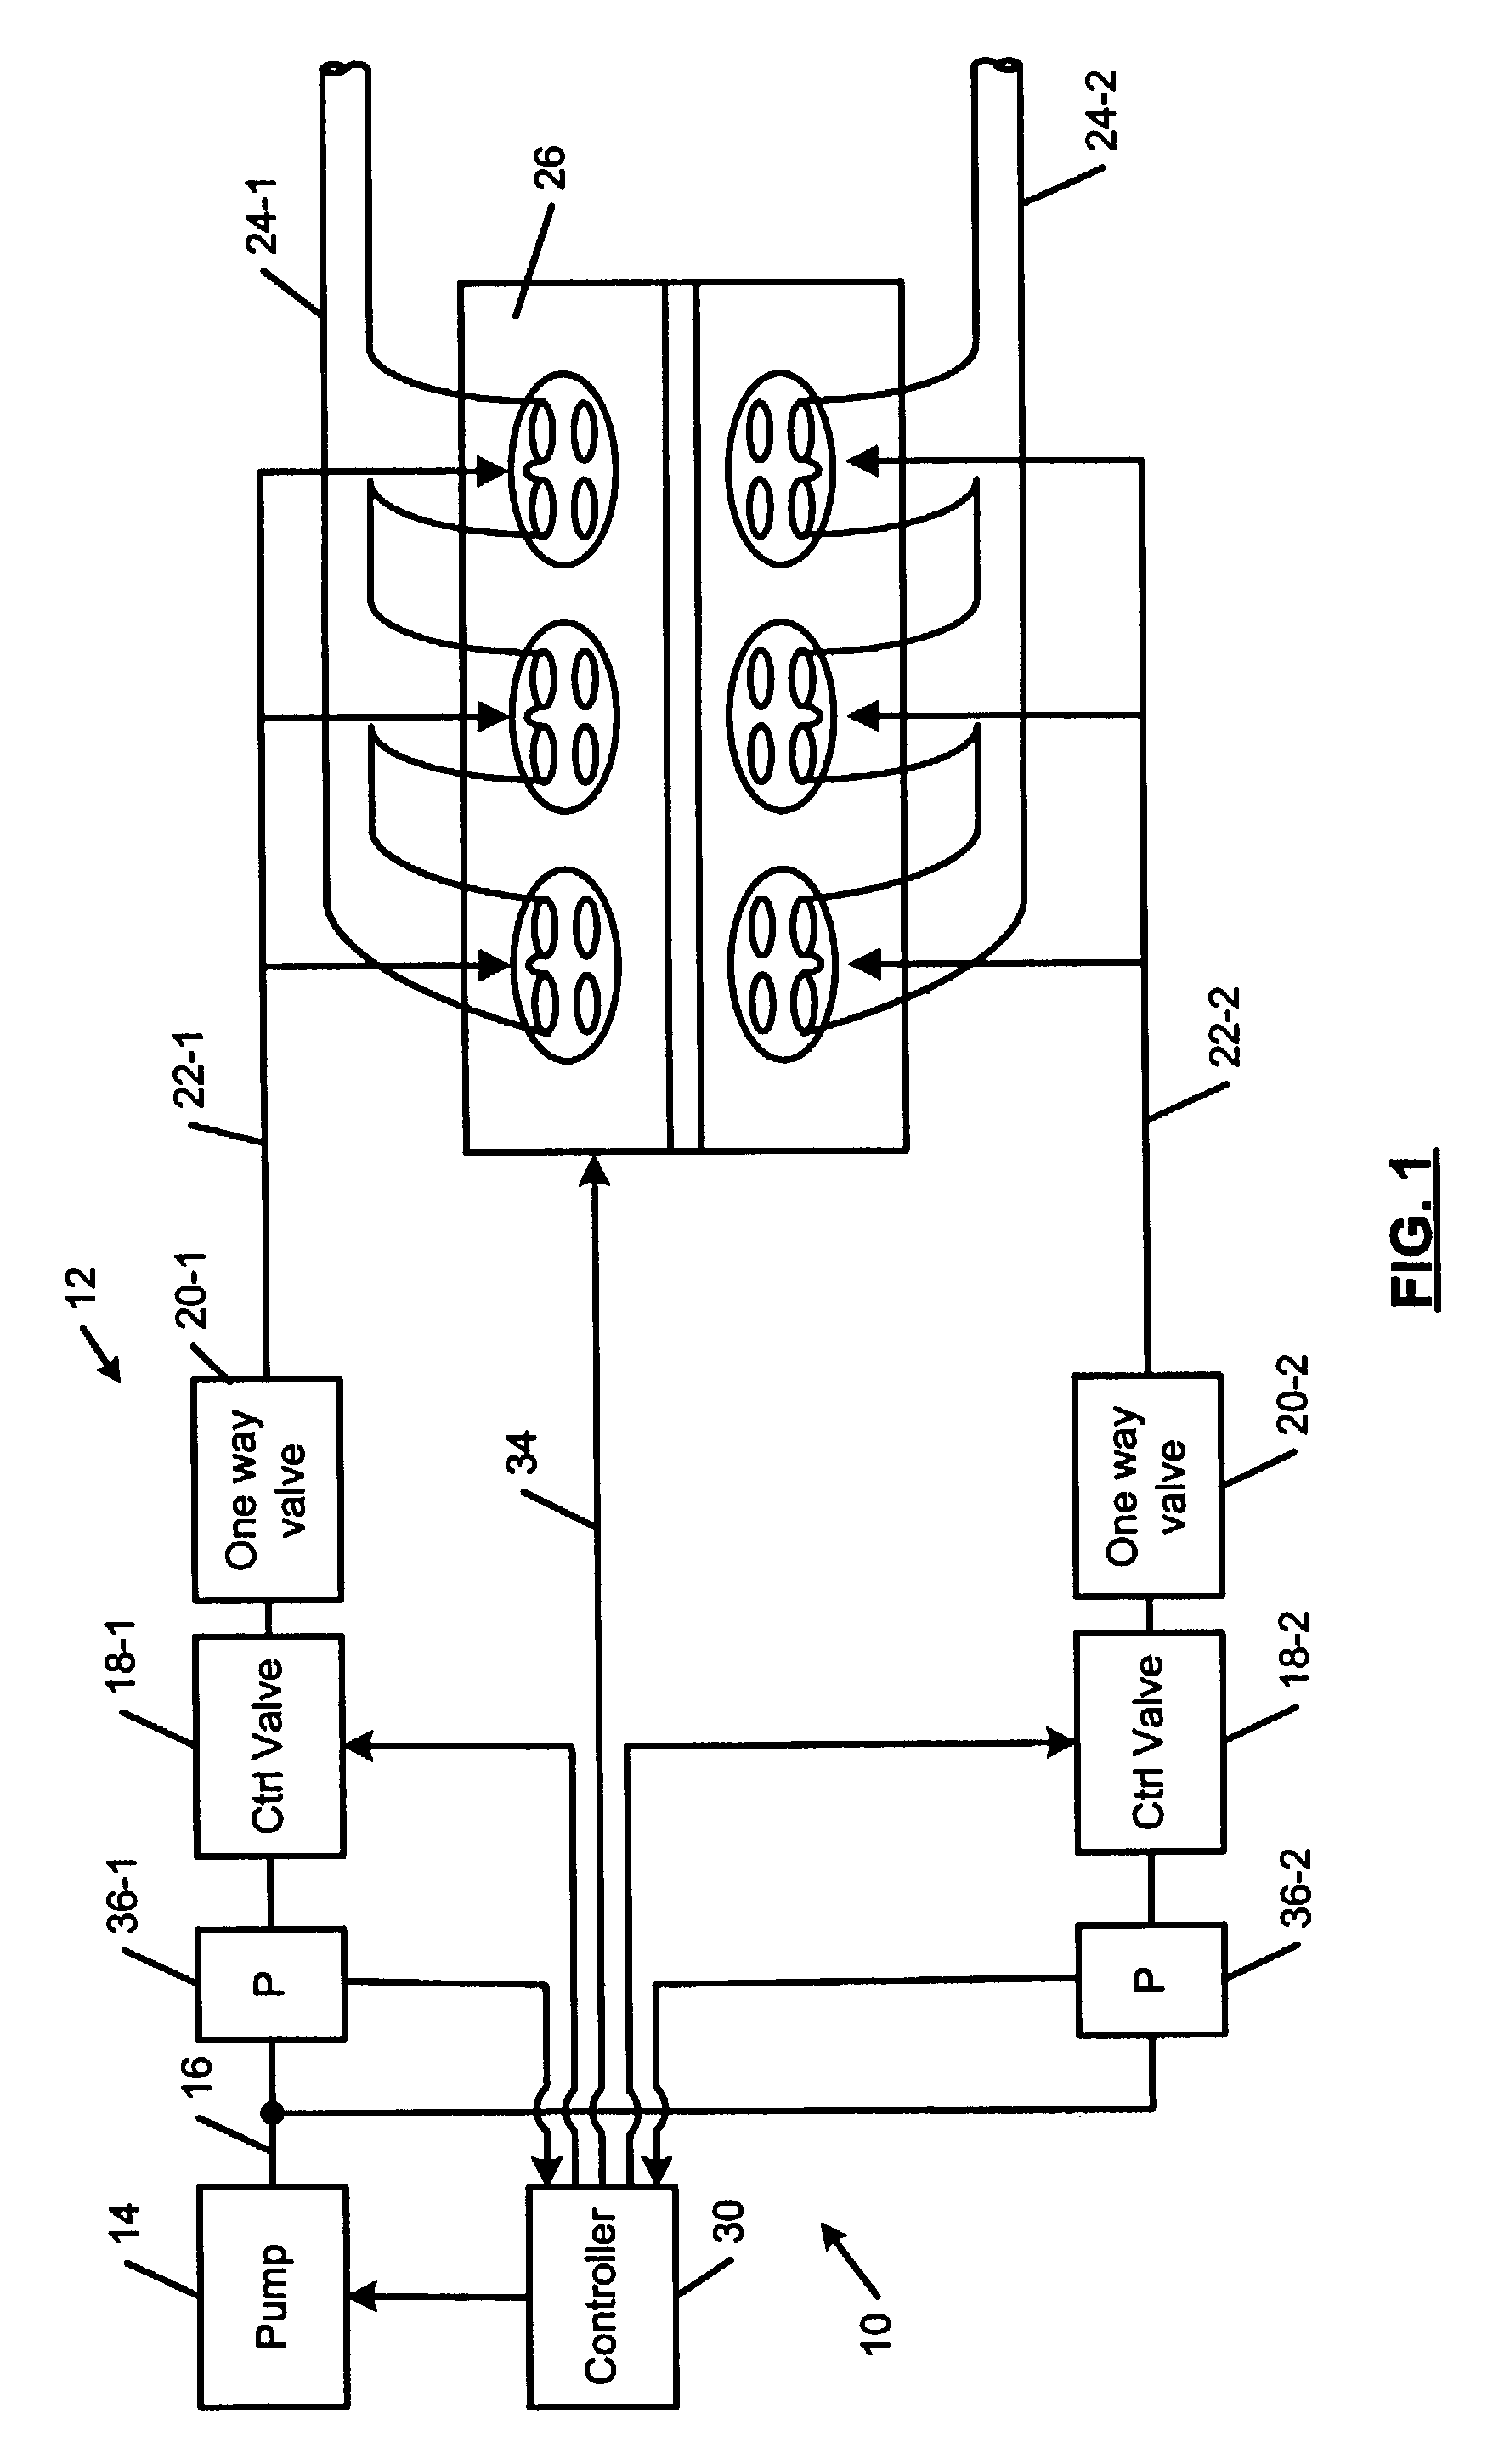 Secondary air injection diagnostic system using pressure feedback